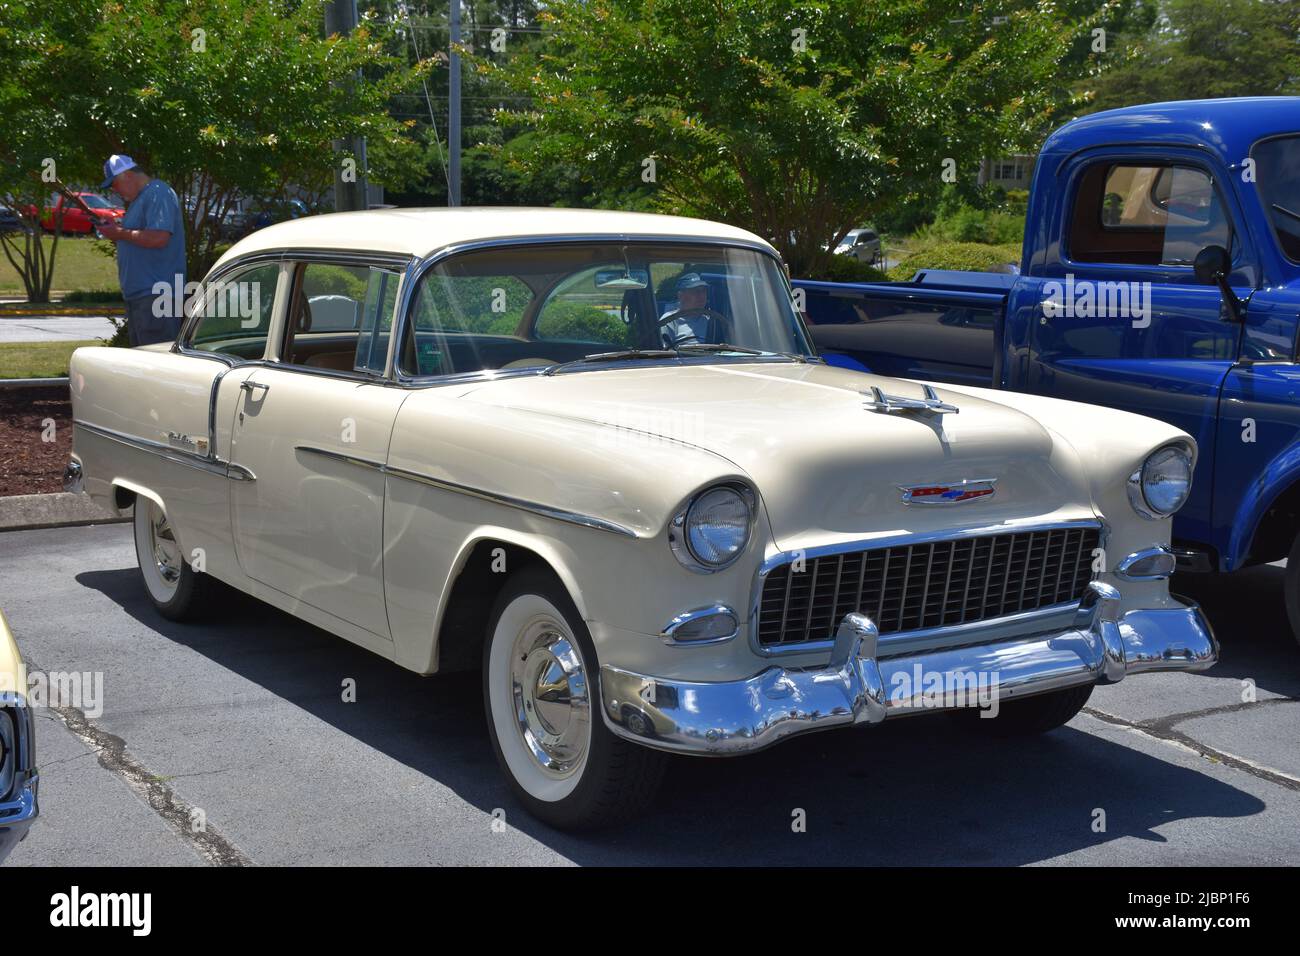 A 1955 Chevrolet Belair on display at a car show. Stock Photo